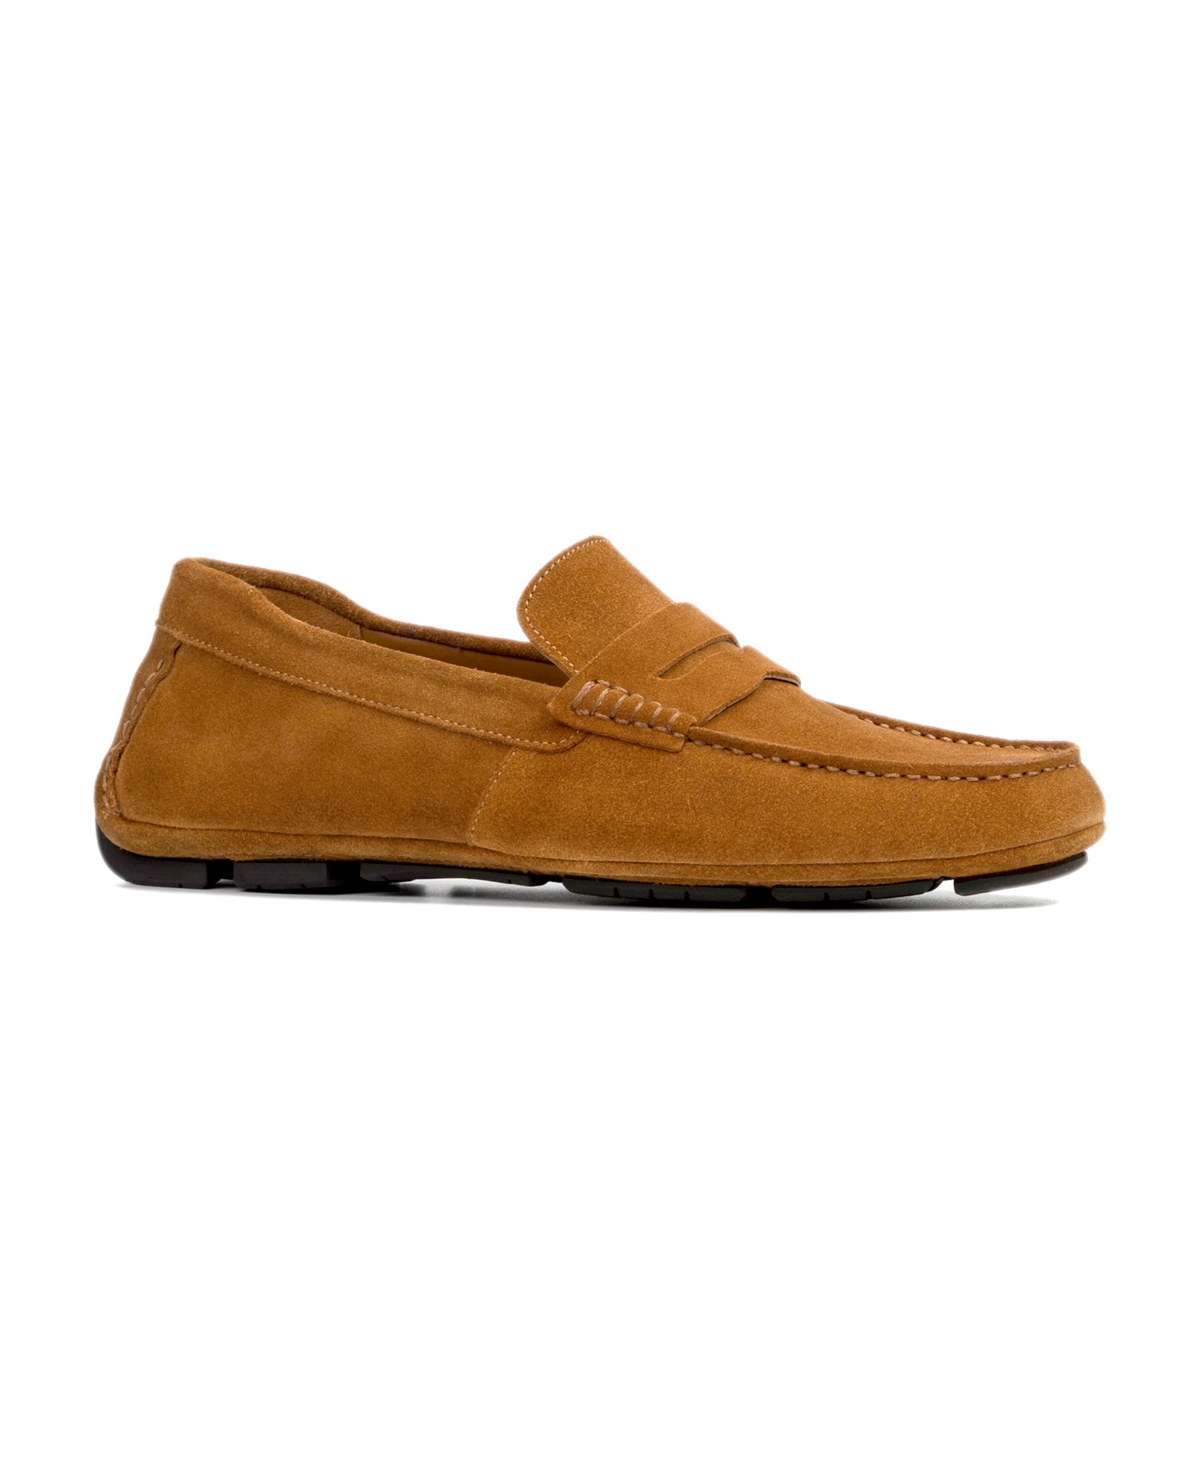 Anthony Veer Men's Cruise Driver Slip-On Leather Loafers Men's Shoes